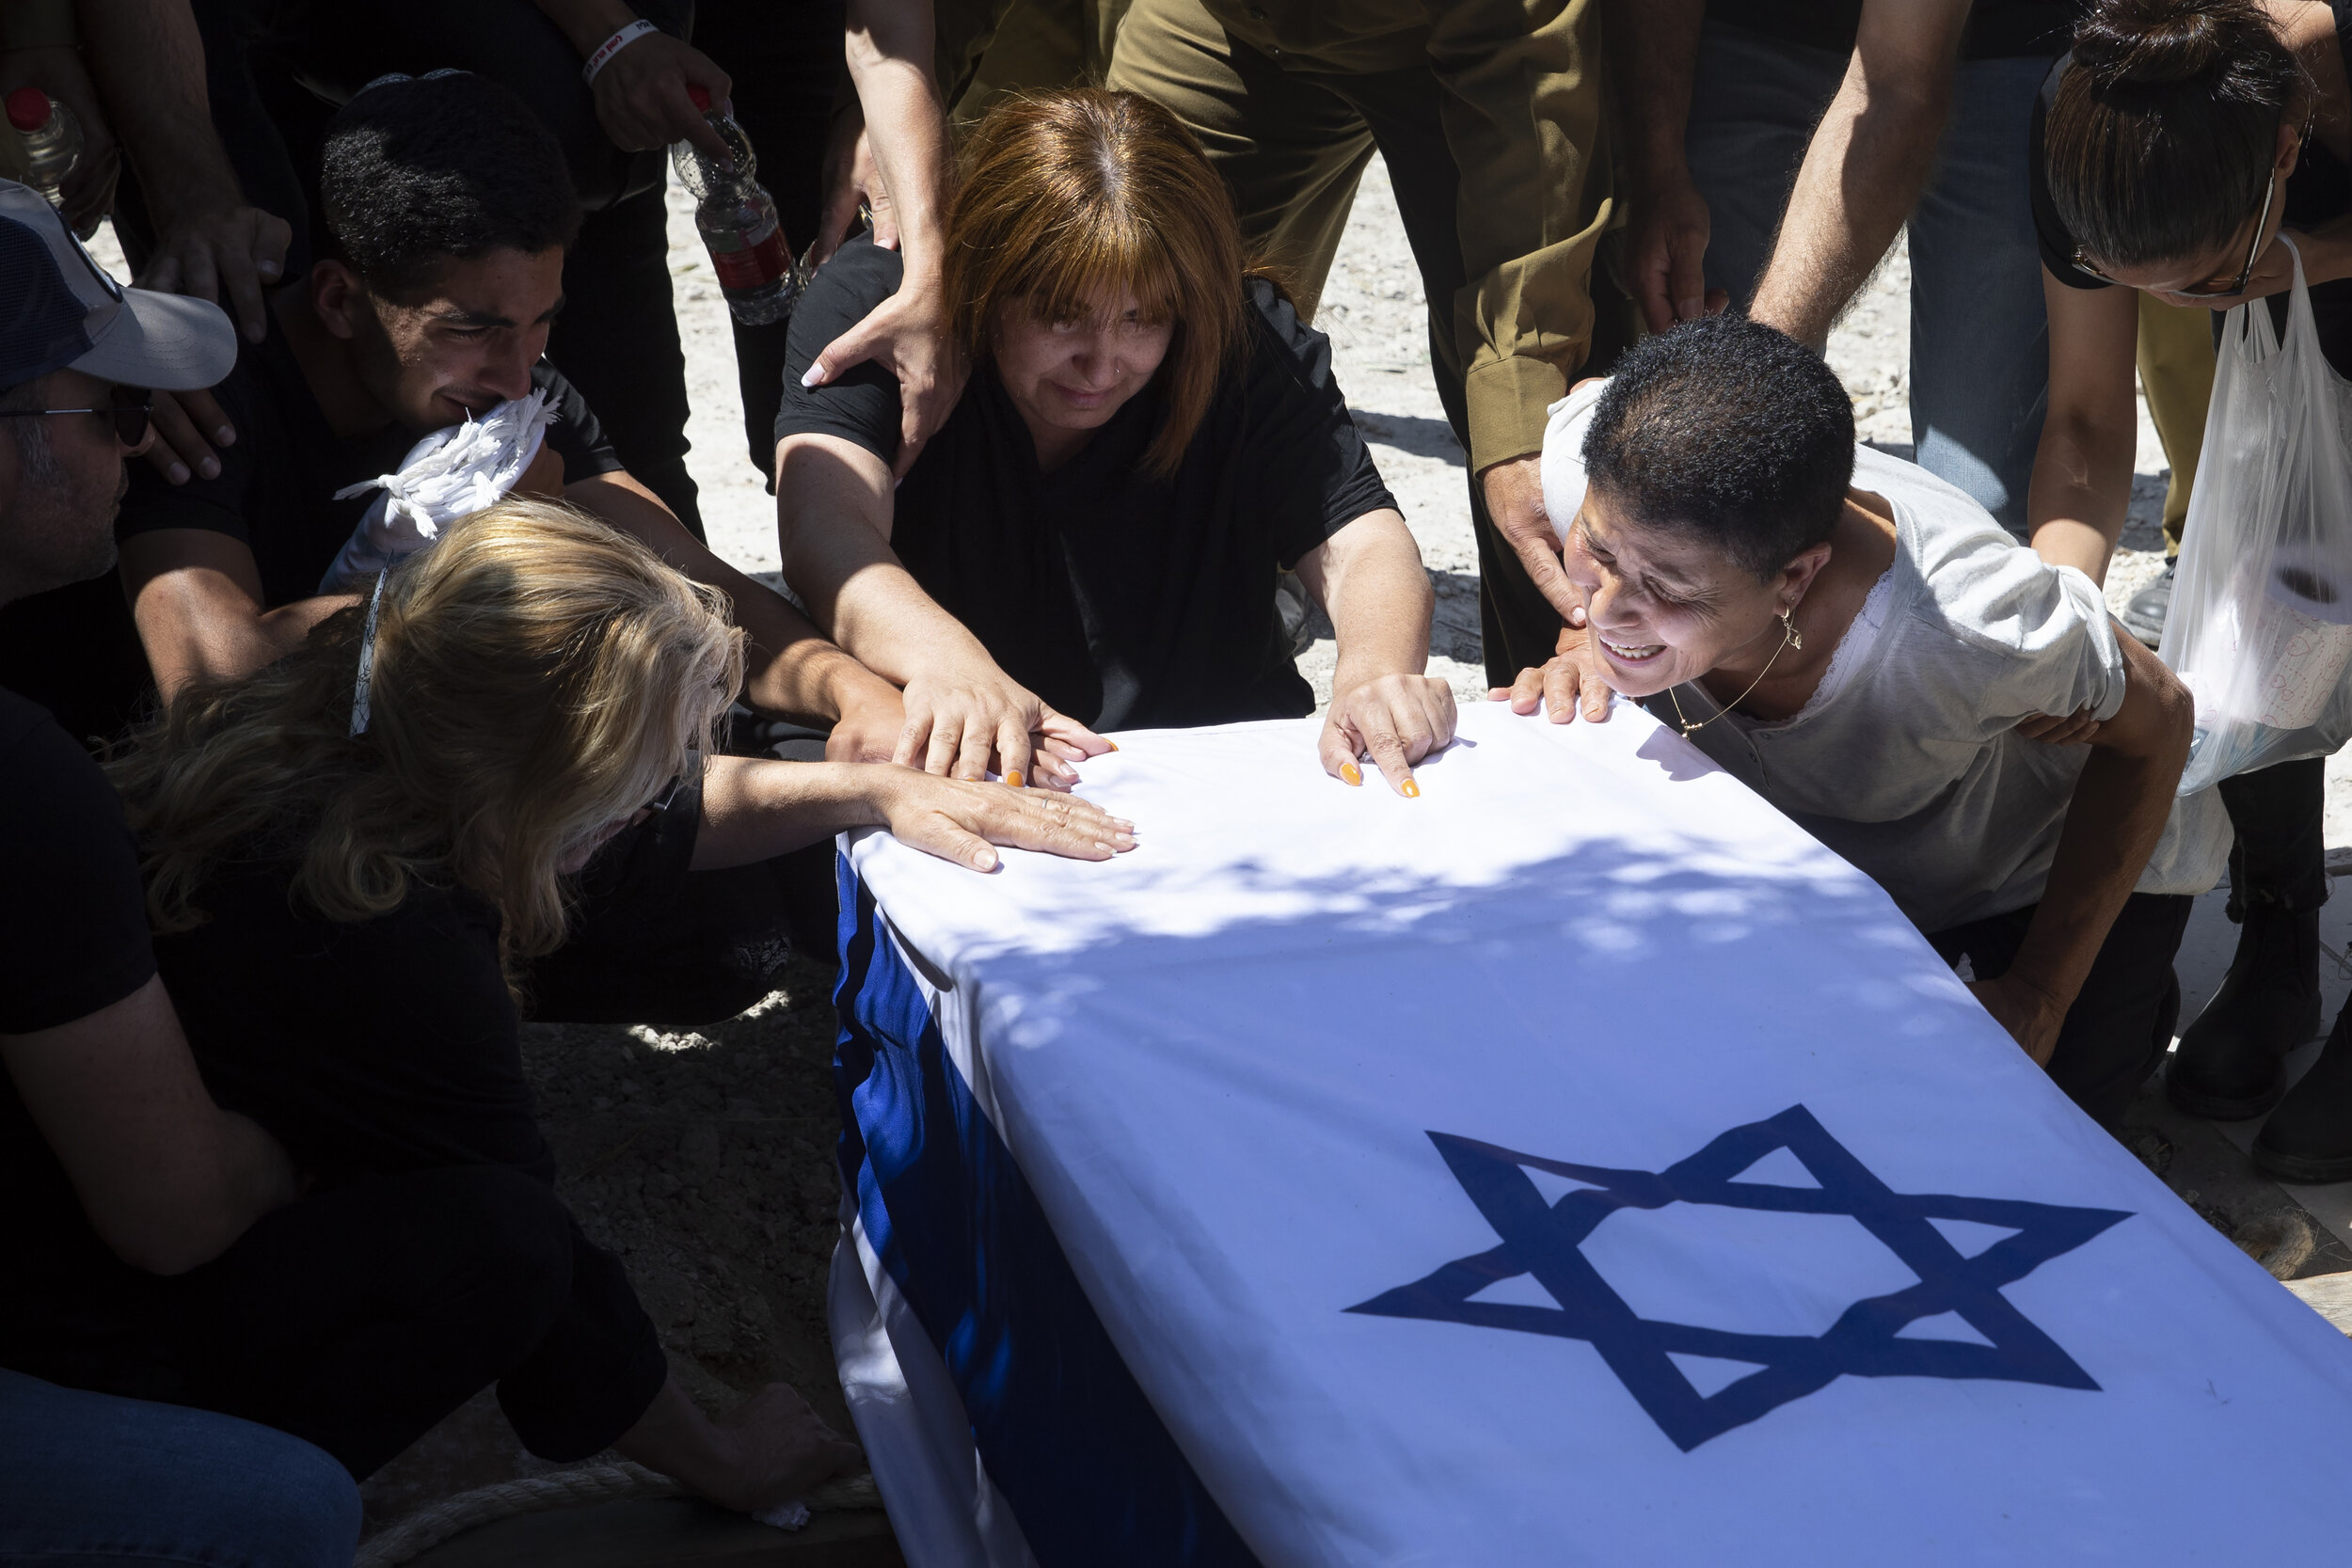  Relatives of Israeli soldier Omer Tabib, 21, mourn during his funeral at the cemetery in the northern Israeli town of Elyakim, Thursday, May 13, 2021. The Israeli army confirmed that Tabib was killed in an anti-tank missile attack near the Gaza Stri